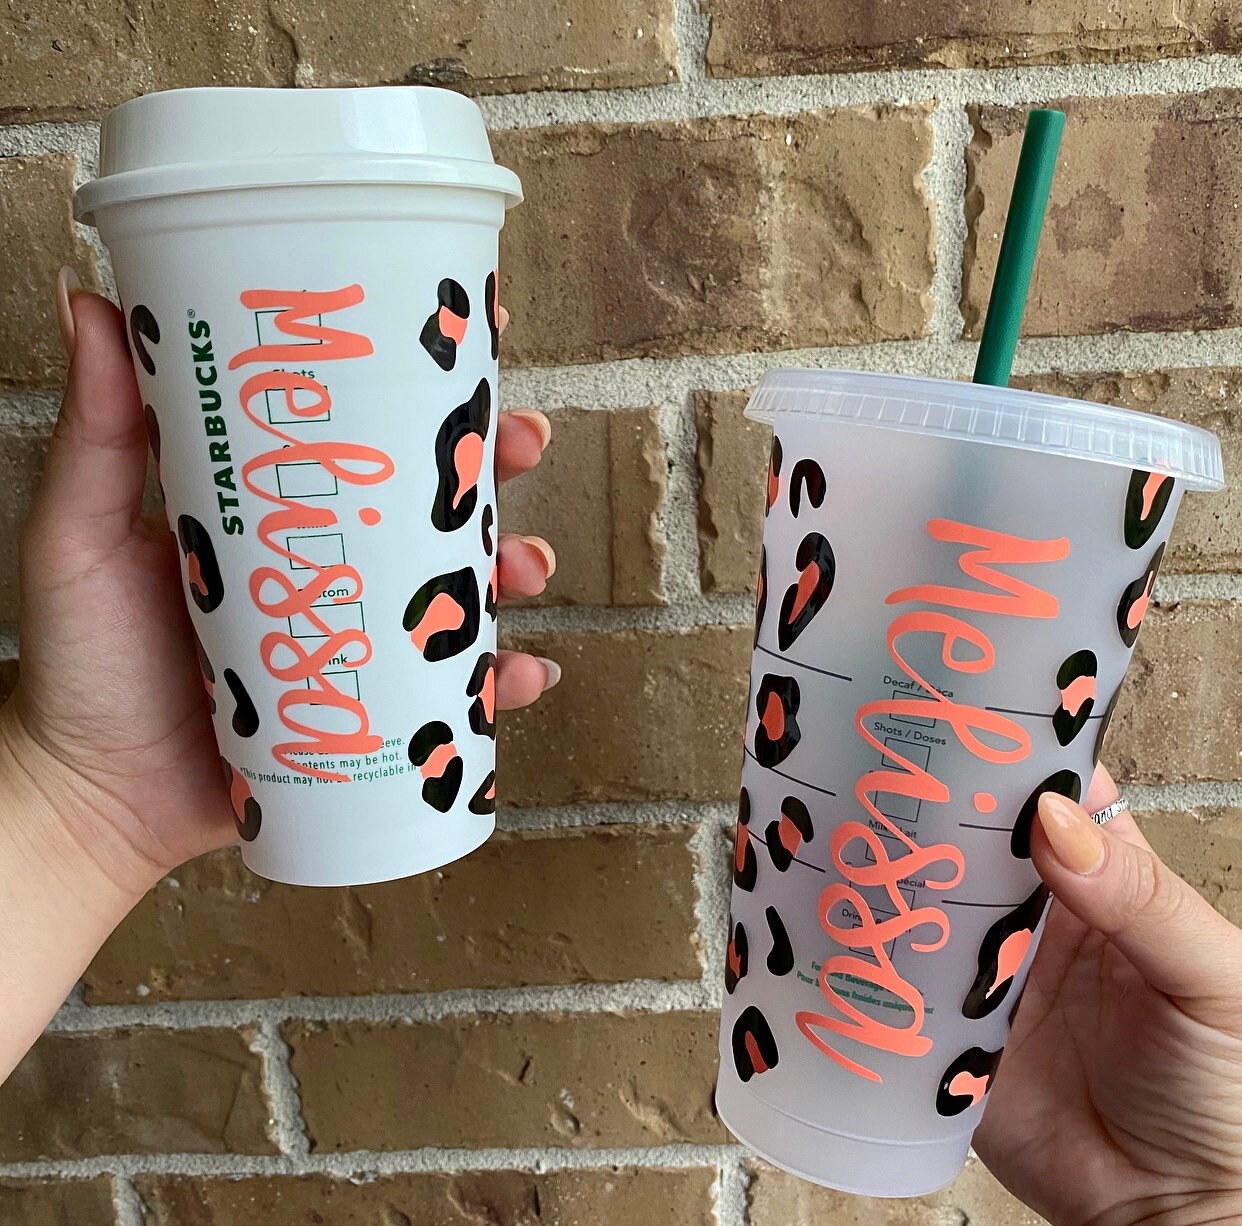 Matching Genuine Starbucks Reusable Hot and Cold Coffee Cup